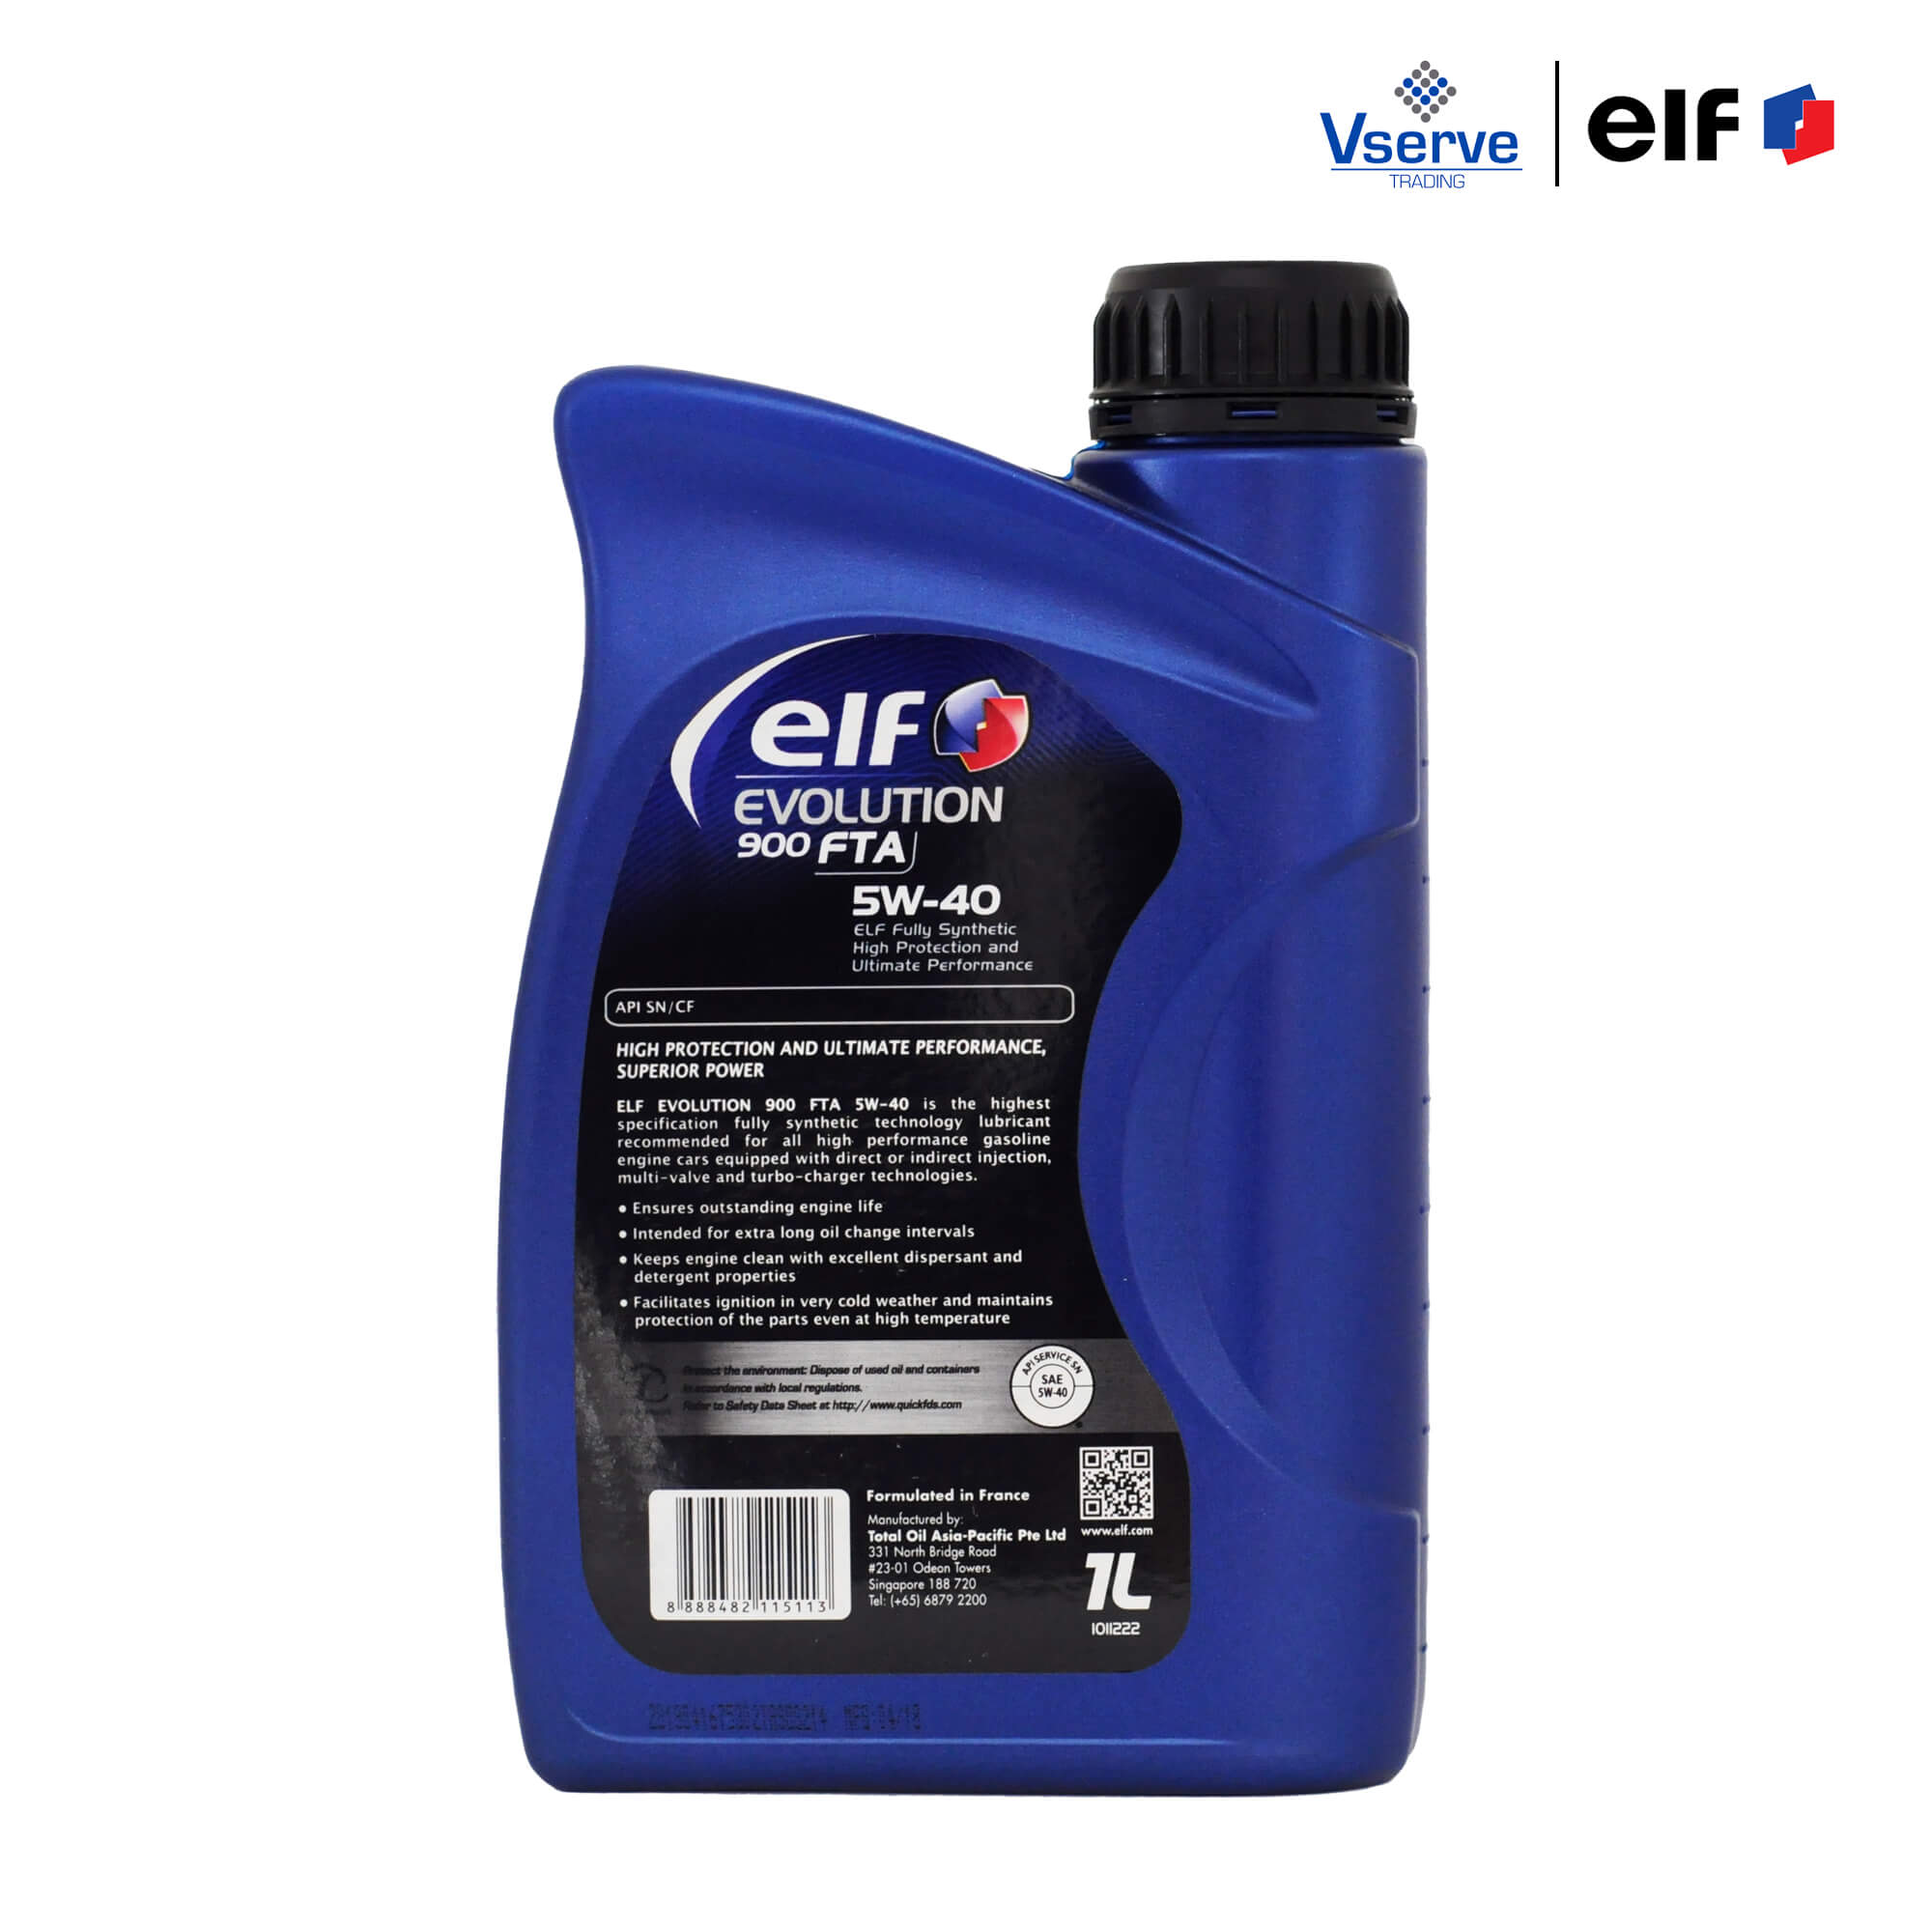 Elf Evolution 900 SXR  Leader in lubricants and additives